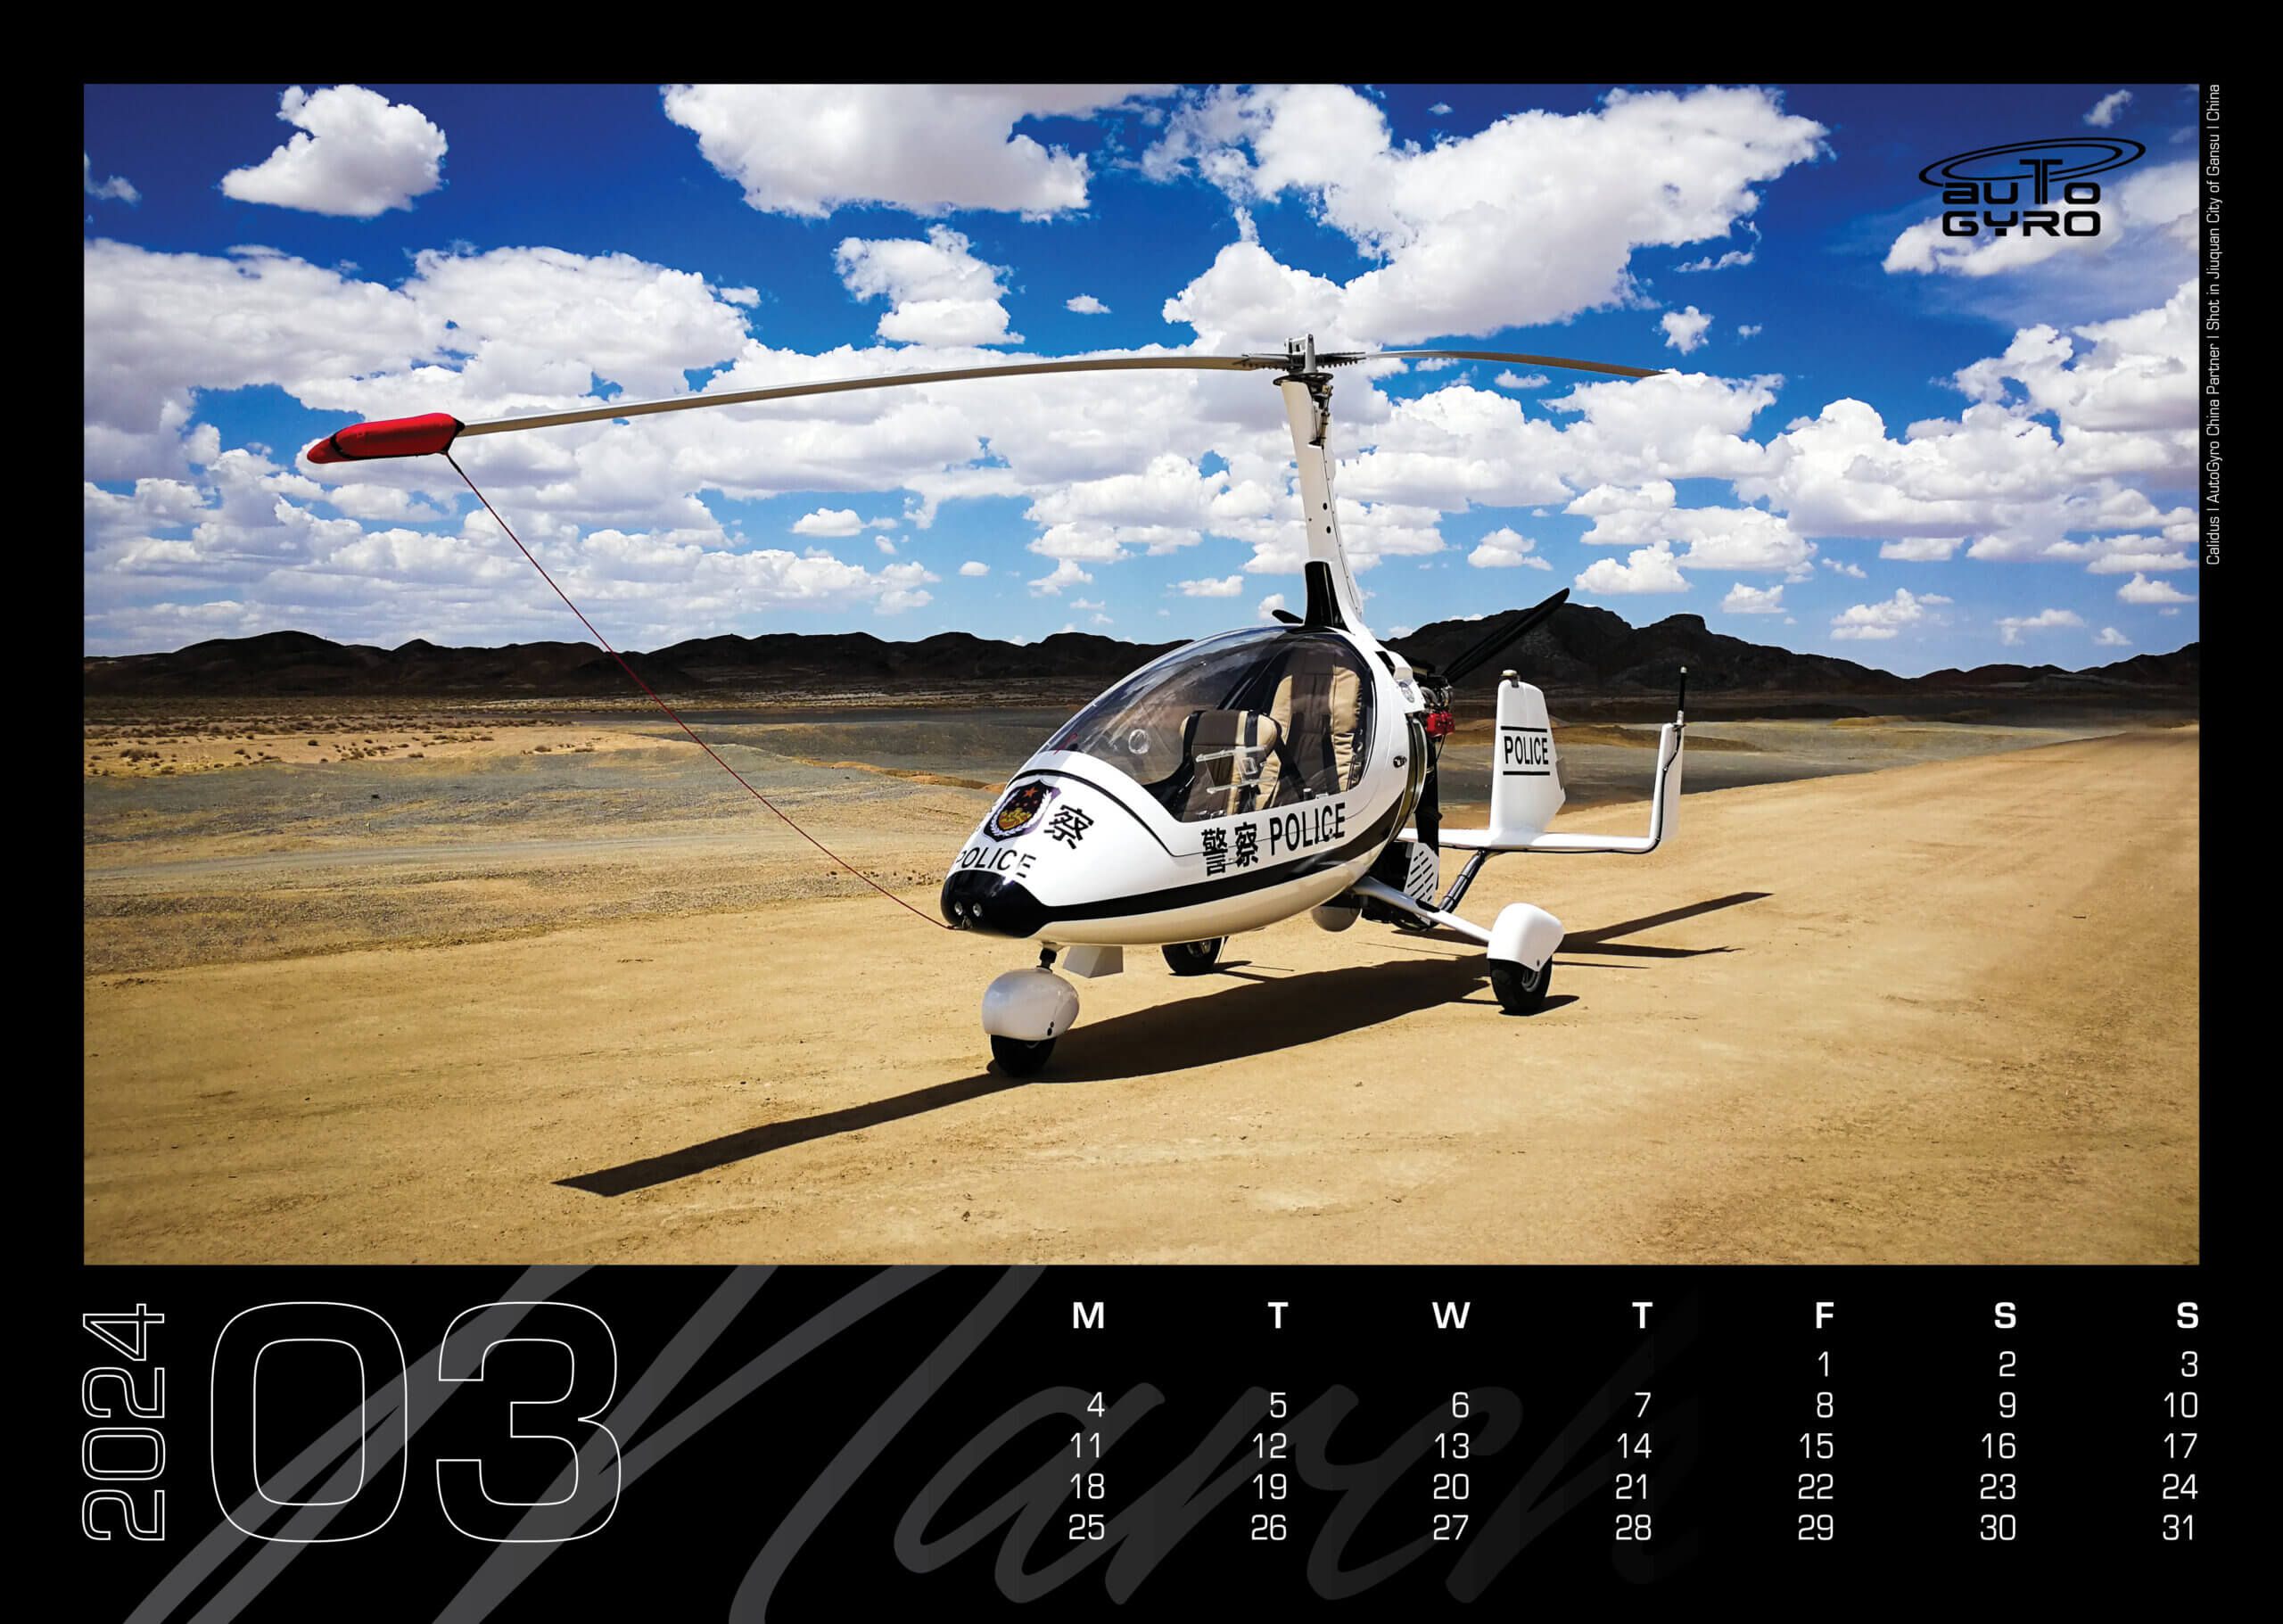 March Calendar Sheet with an AutoGyro CAlidus for chineese Police in the desert